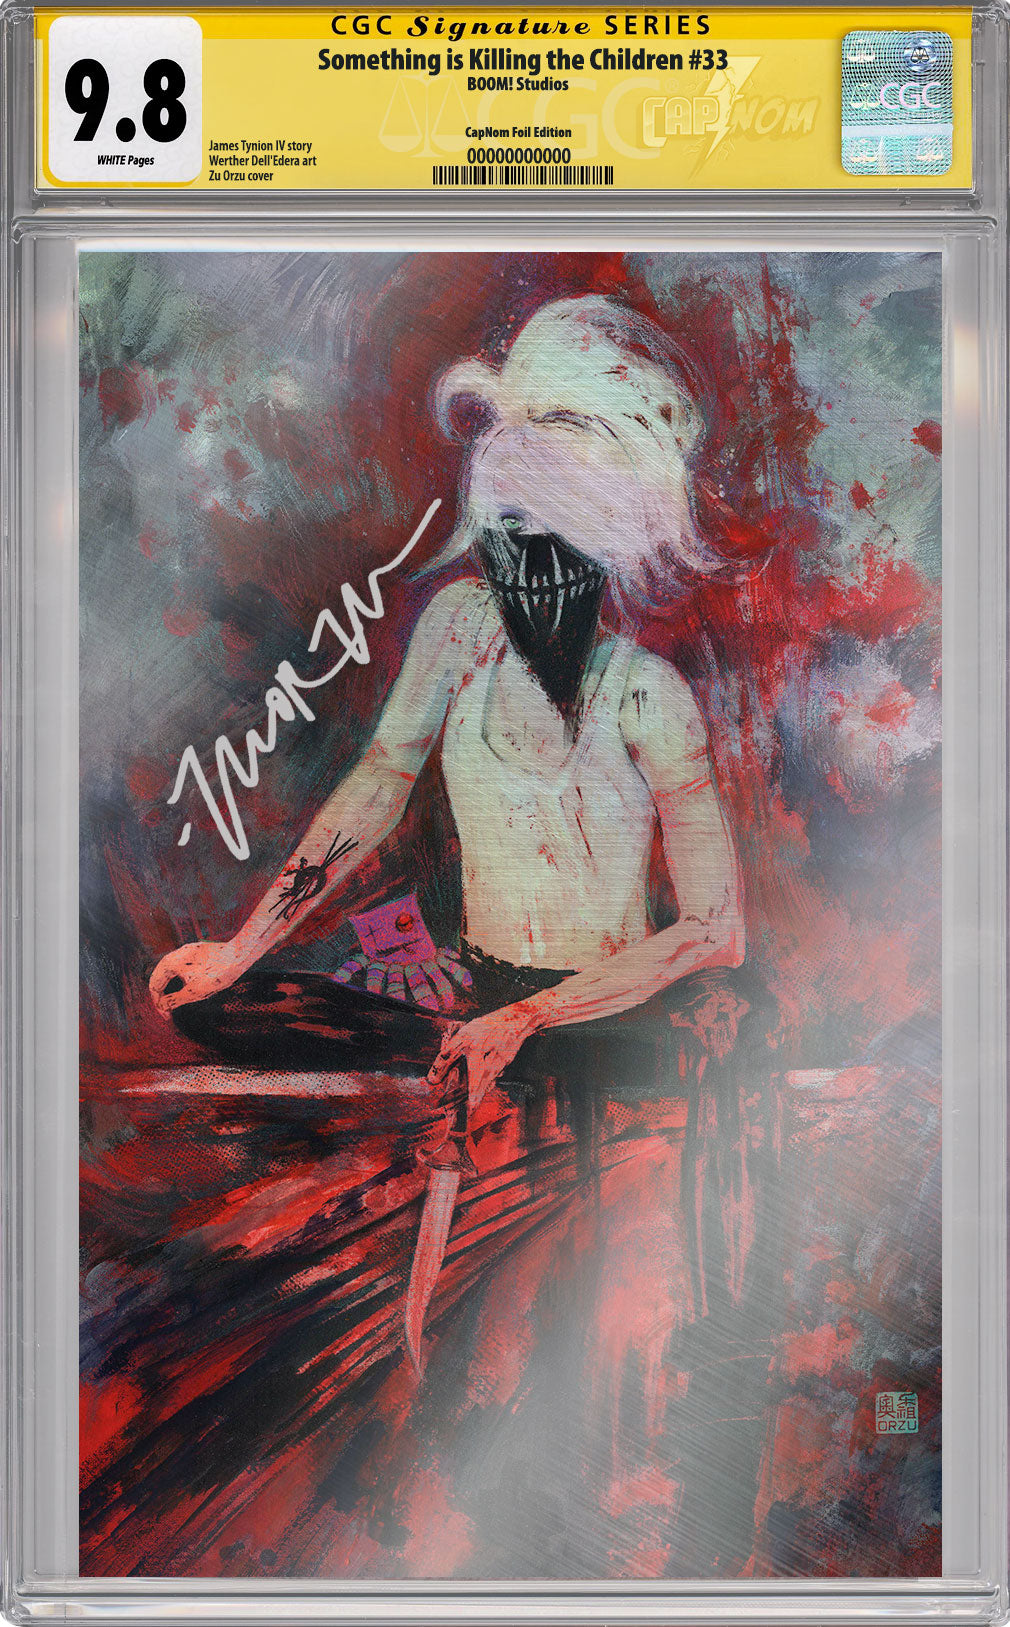 SOMETHING IS KILLING THE CHILDREN #33 FOIL COVER BY ZU ORZU CGC SIG SERIES SIGNED BY ZU ORZU